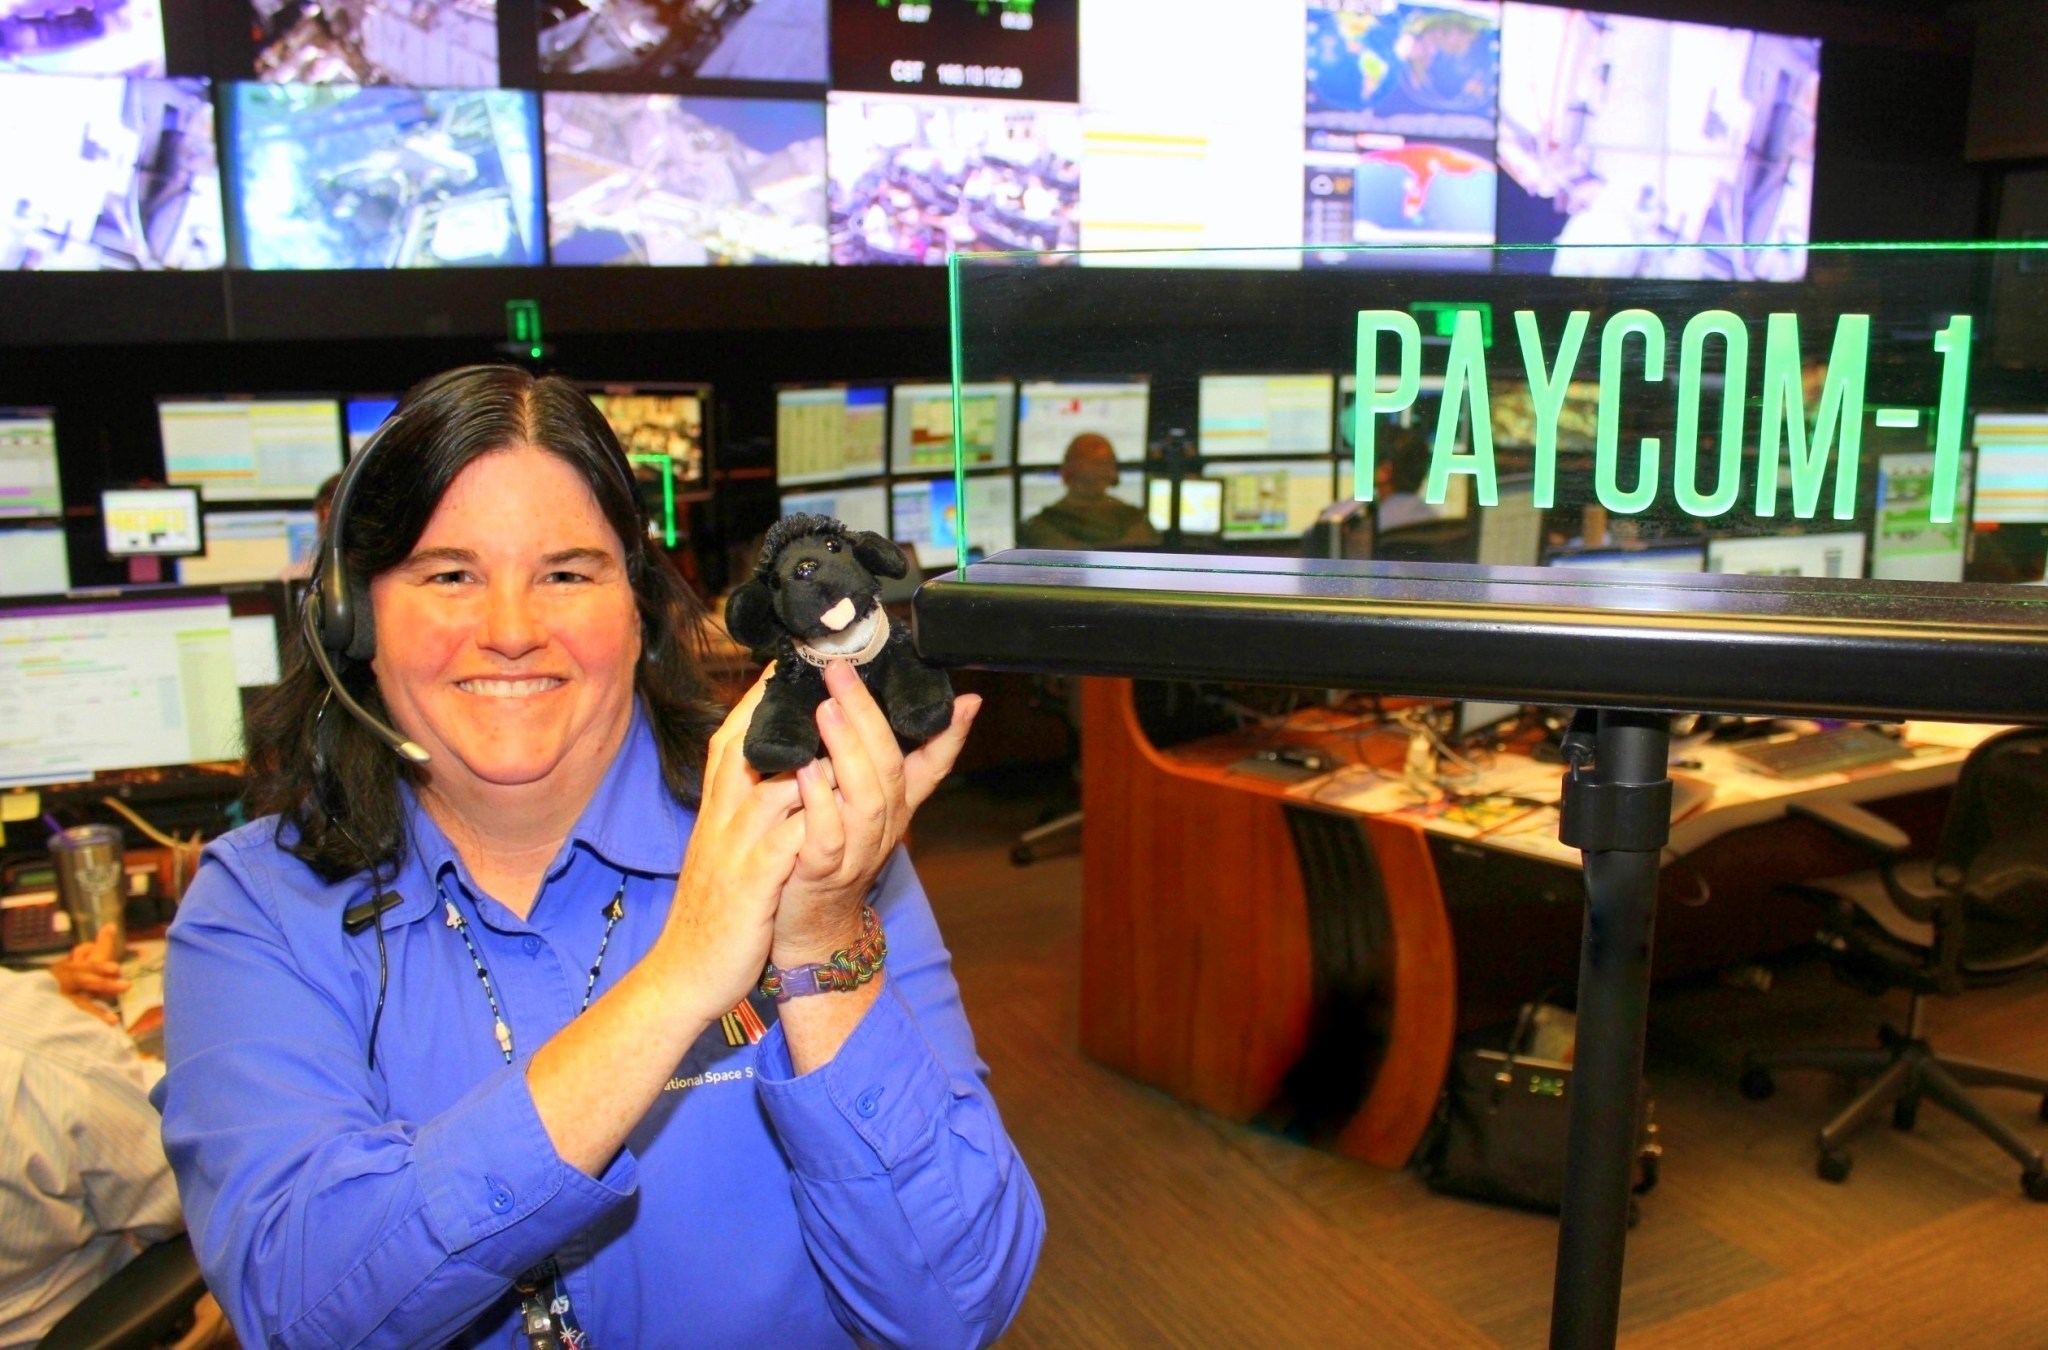 Inside the Payload Operations Integration Center, PAYCOM console operator Penny Pettigrew highlights the importance of teamwork.